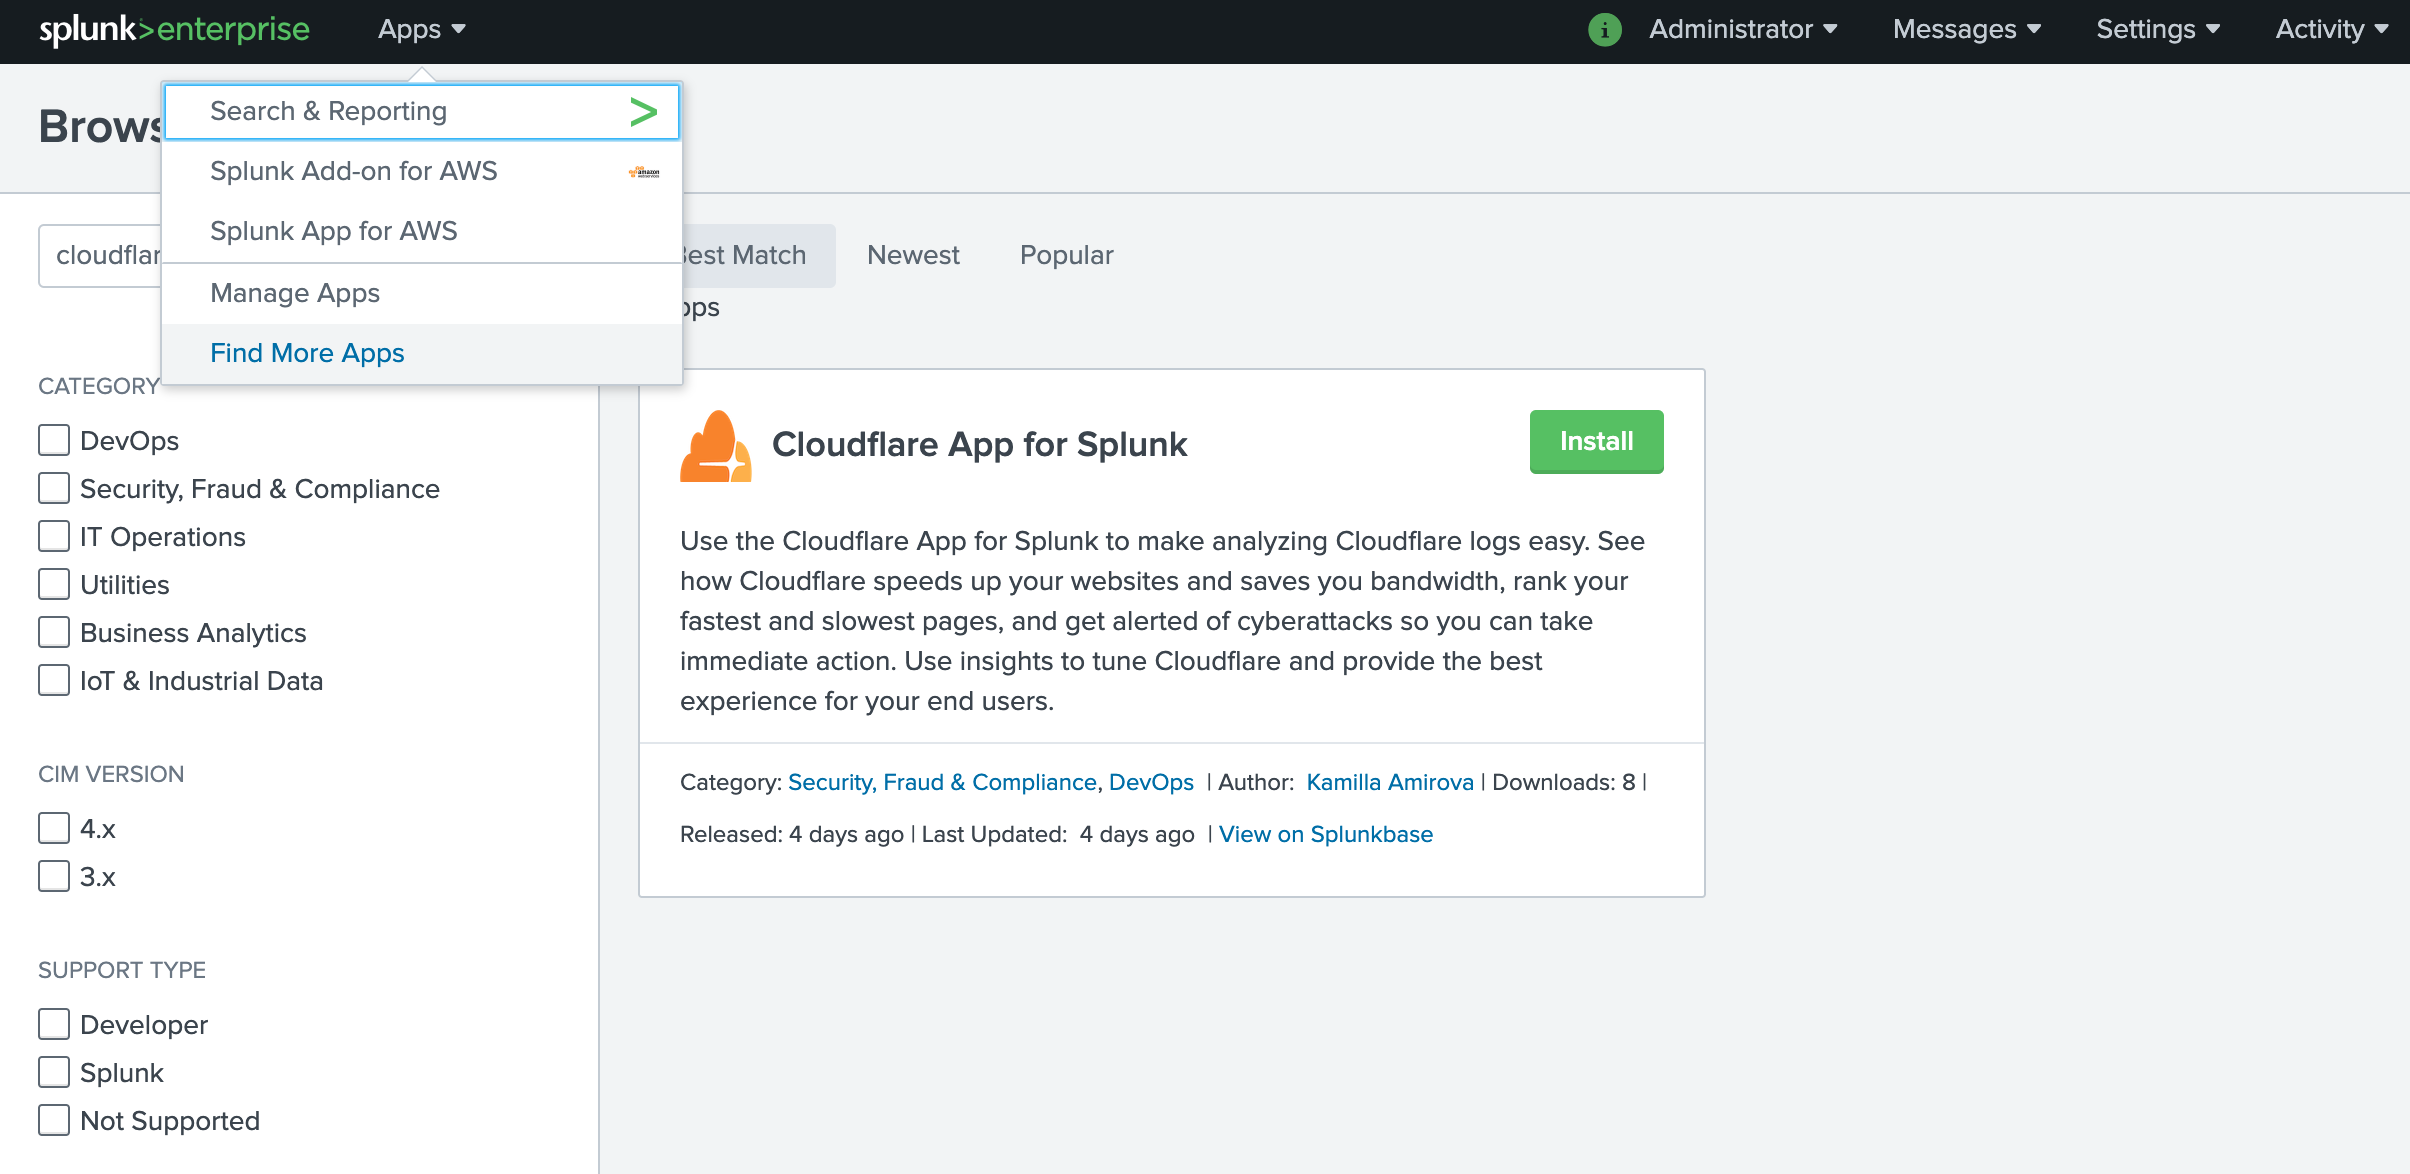 Splunk website with Apps menu expanded and Search &amp; Reporting menu item along with Cloudflare App for Splunk